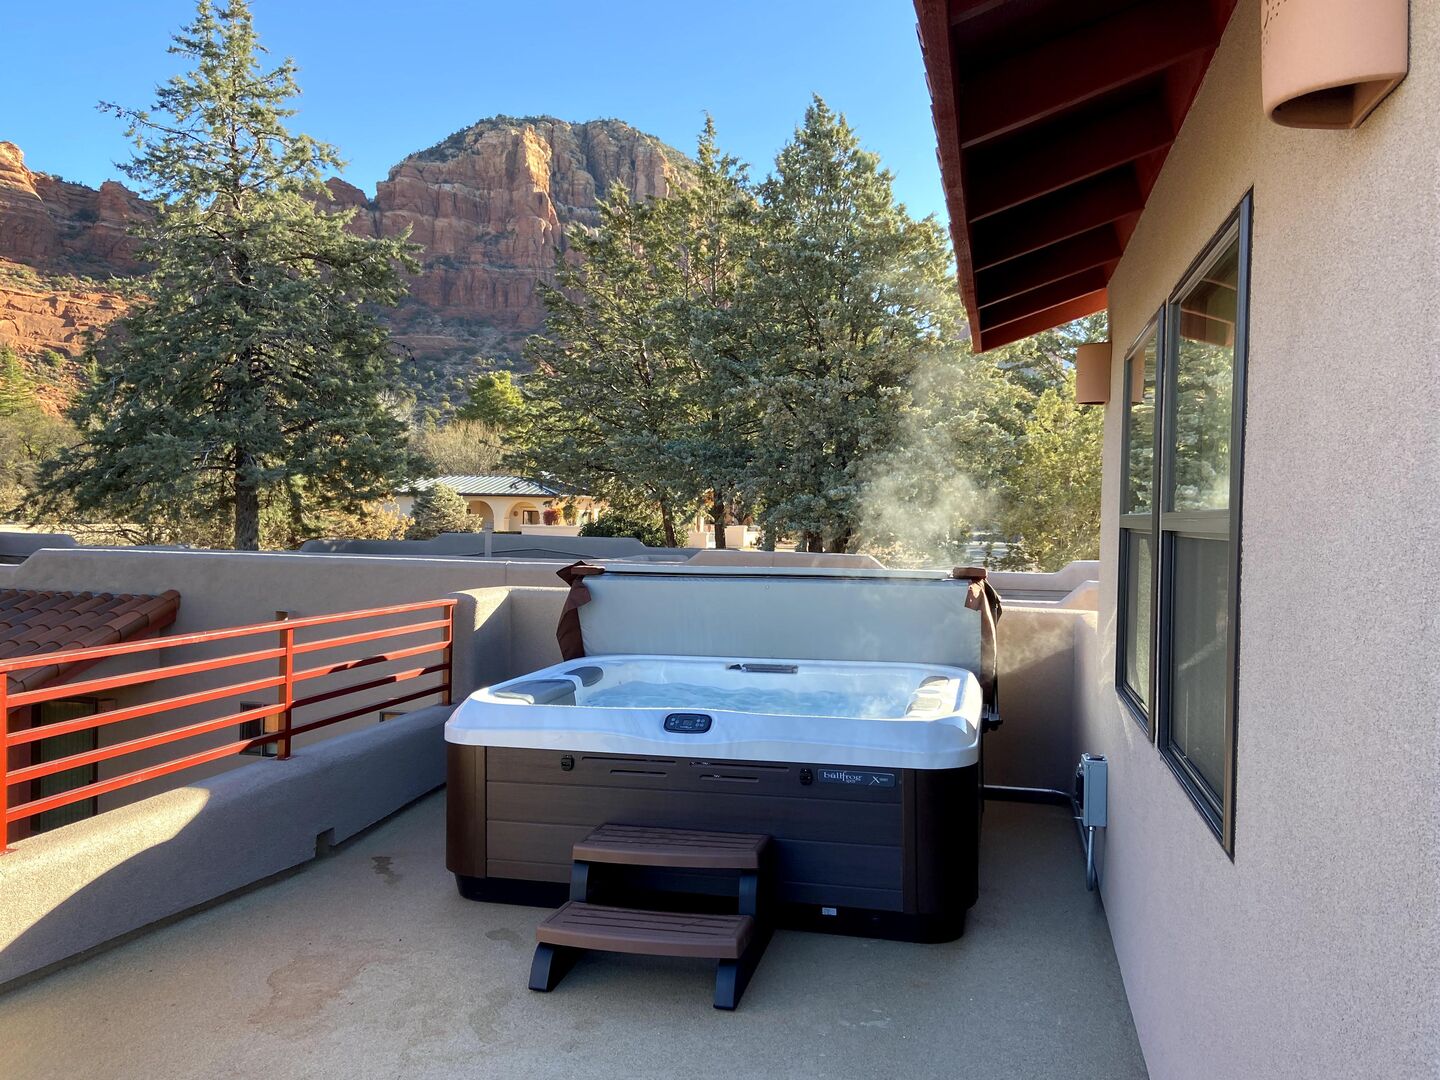 Rooftop Deck with a Private Hot Tub